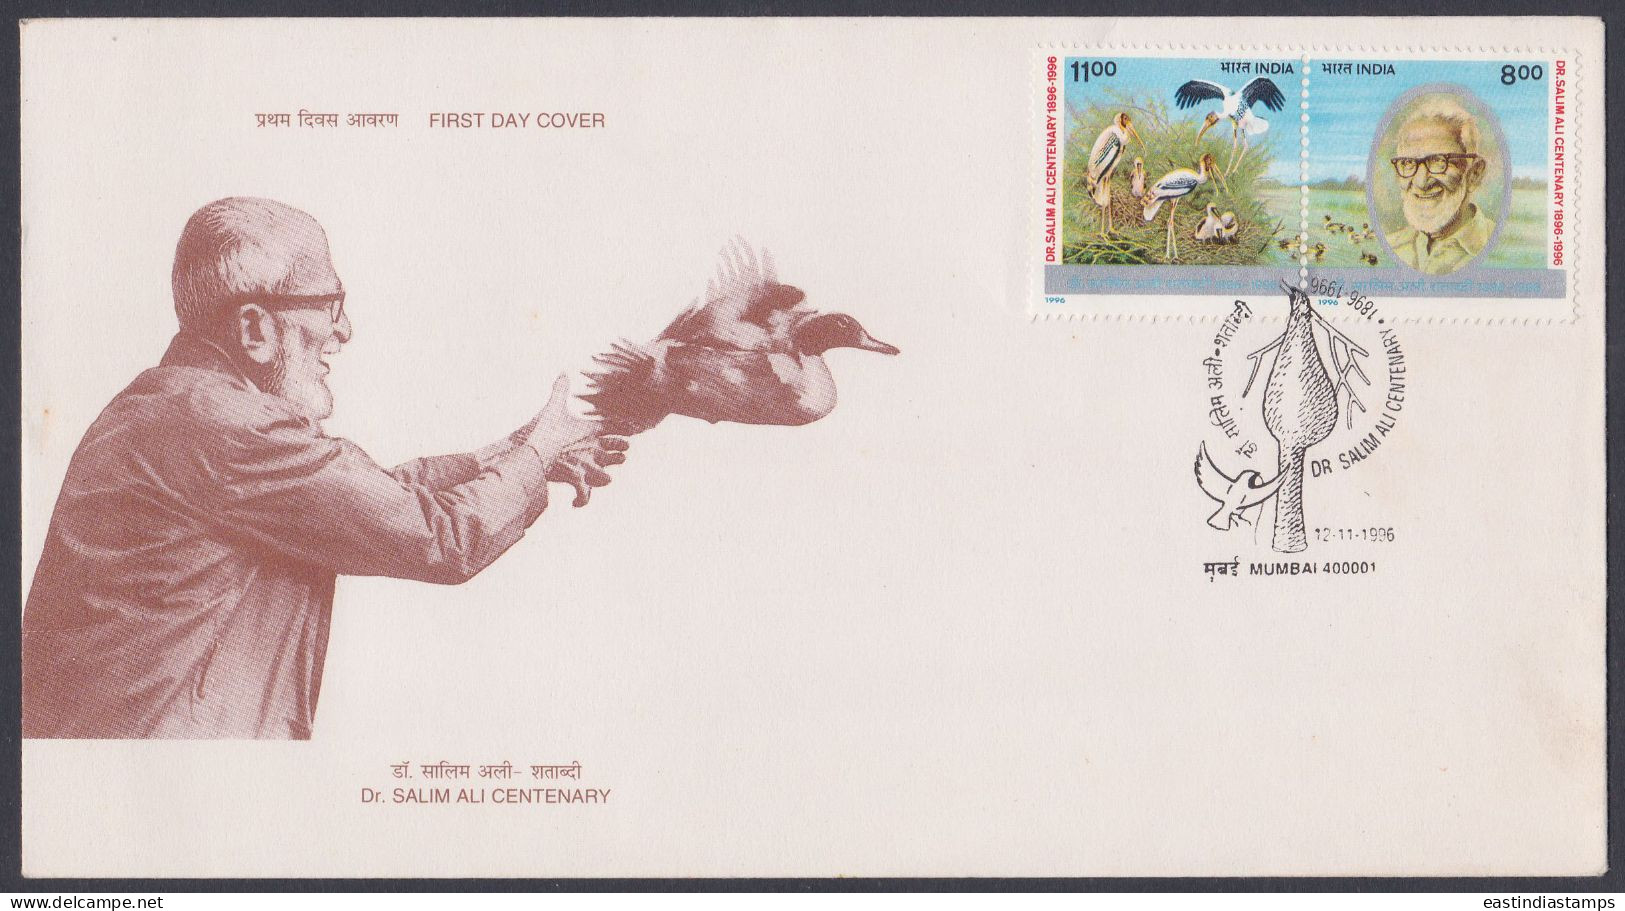 Inde India 1996 FDC Dr. Salim Ali, Centenary, Bird, Birds, Crane, Se-tenant, WIldlife, Wild Life, First Day Cover - Covers & Documents